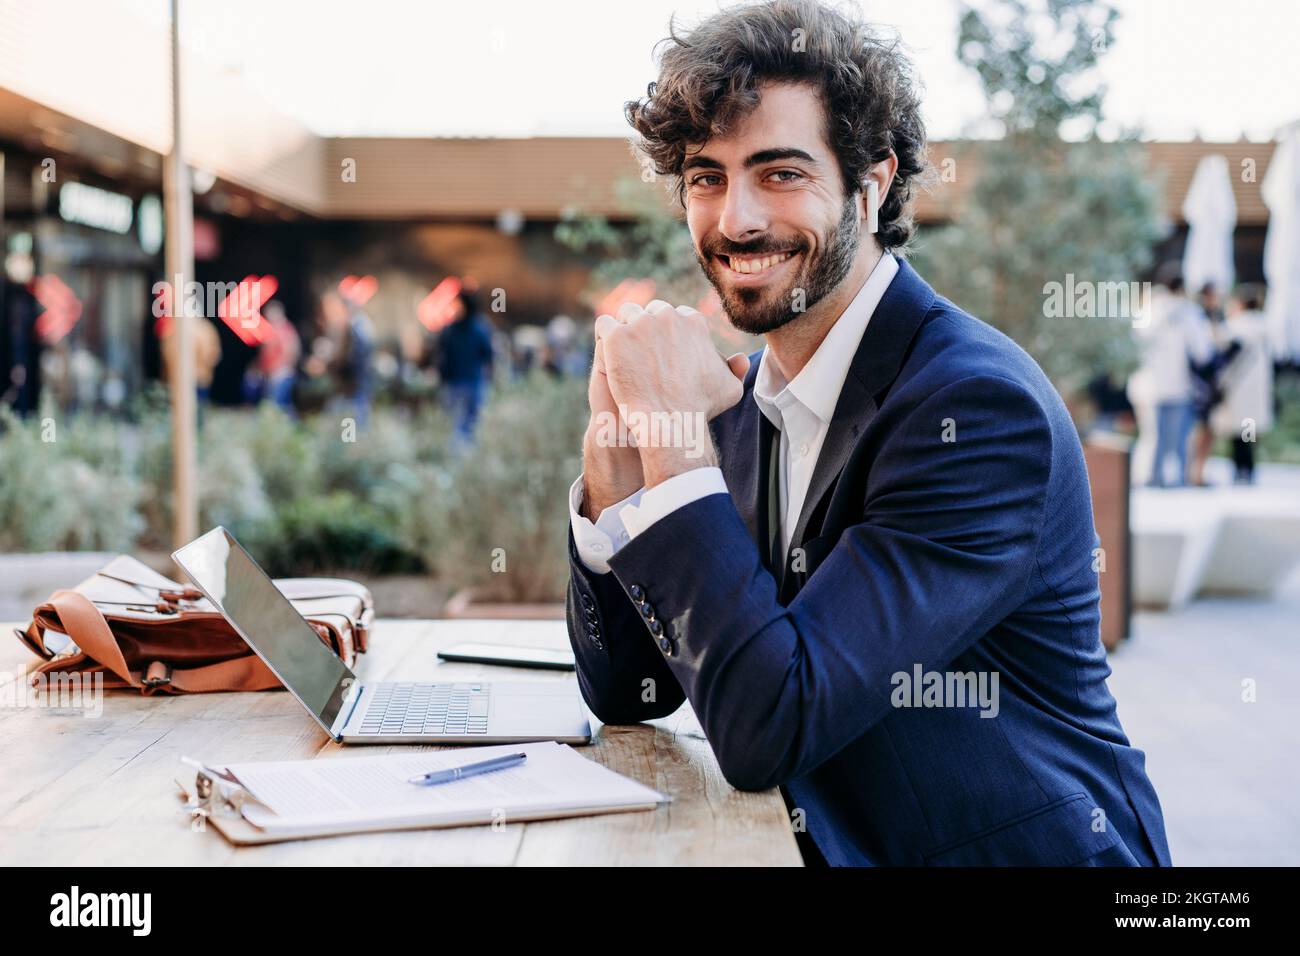 Smiling businessman leaning on elbows sitting at table Stock Photo